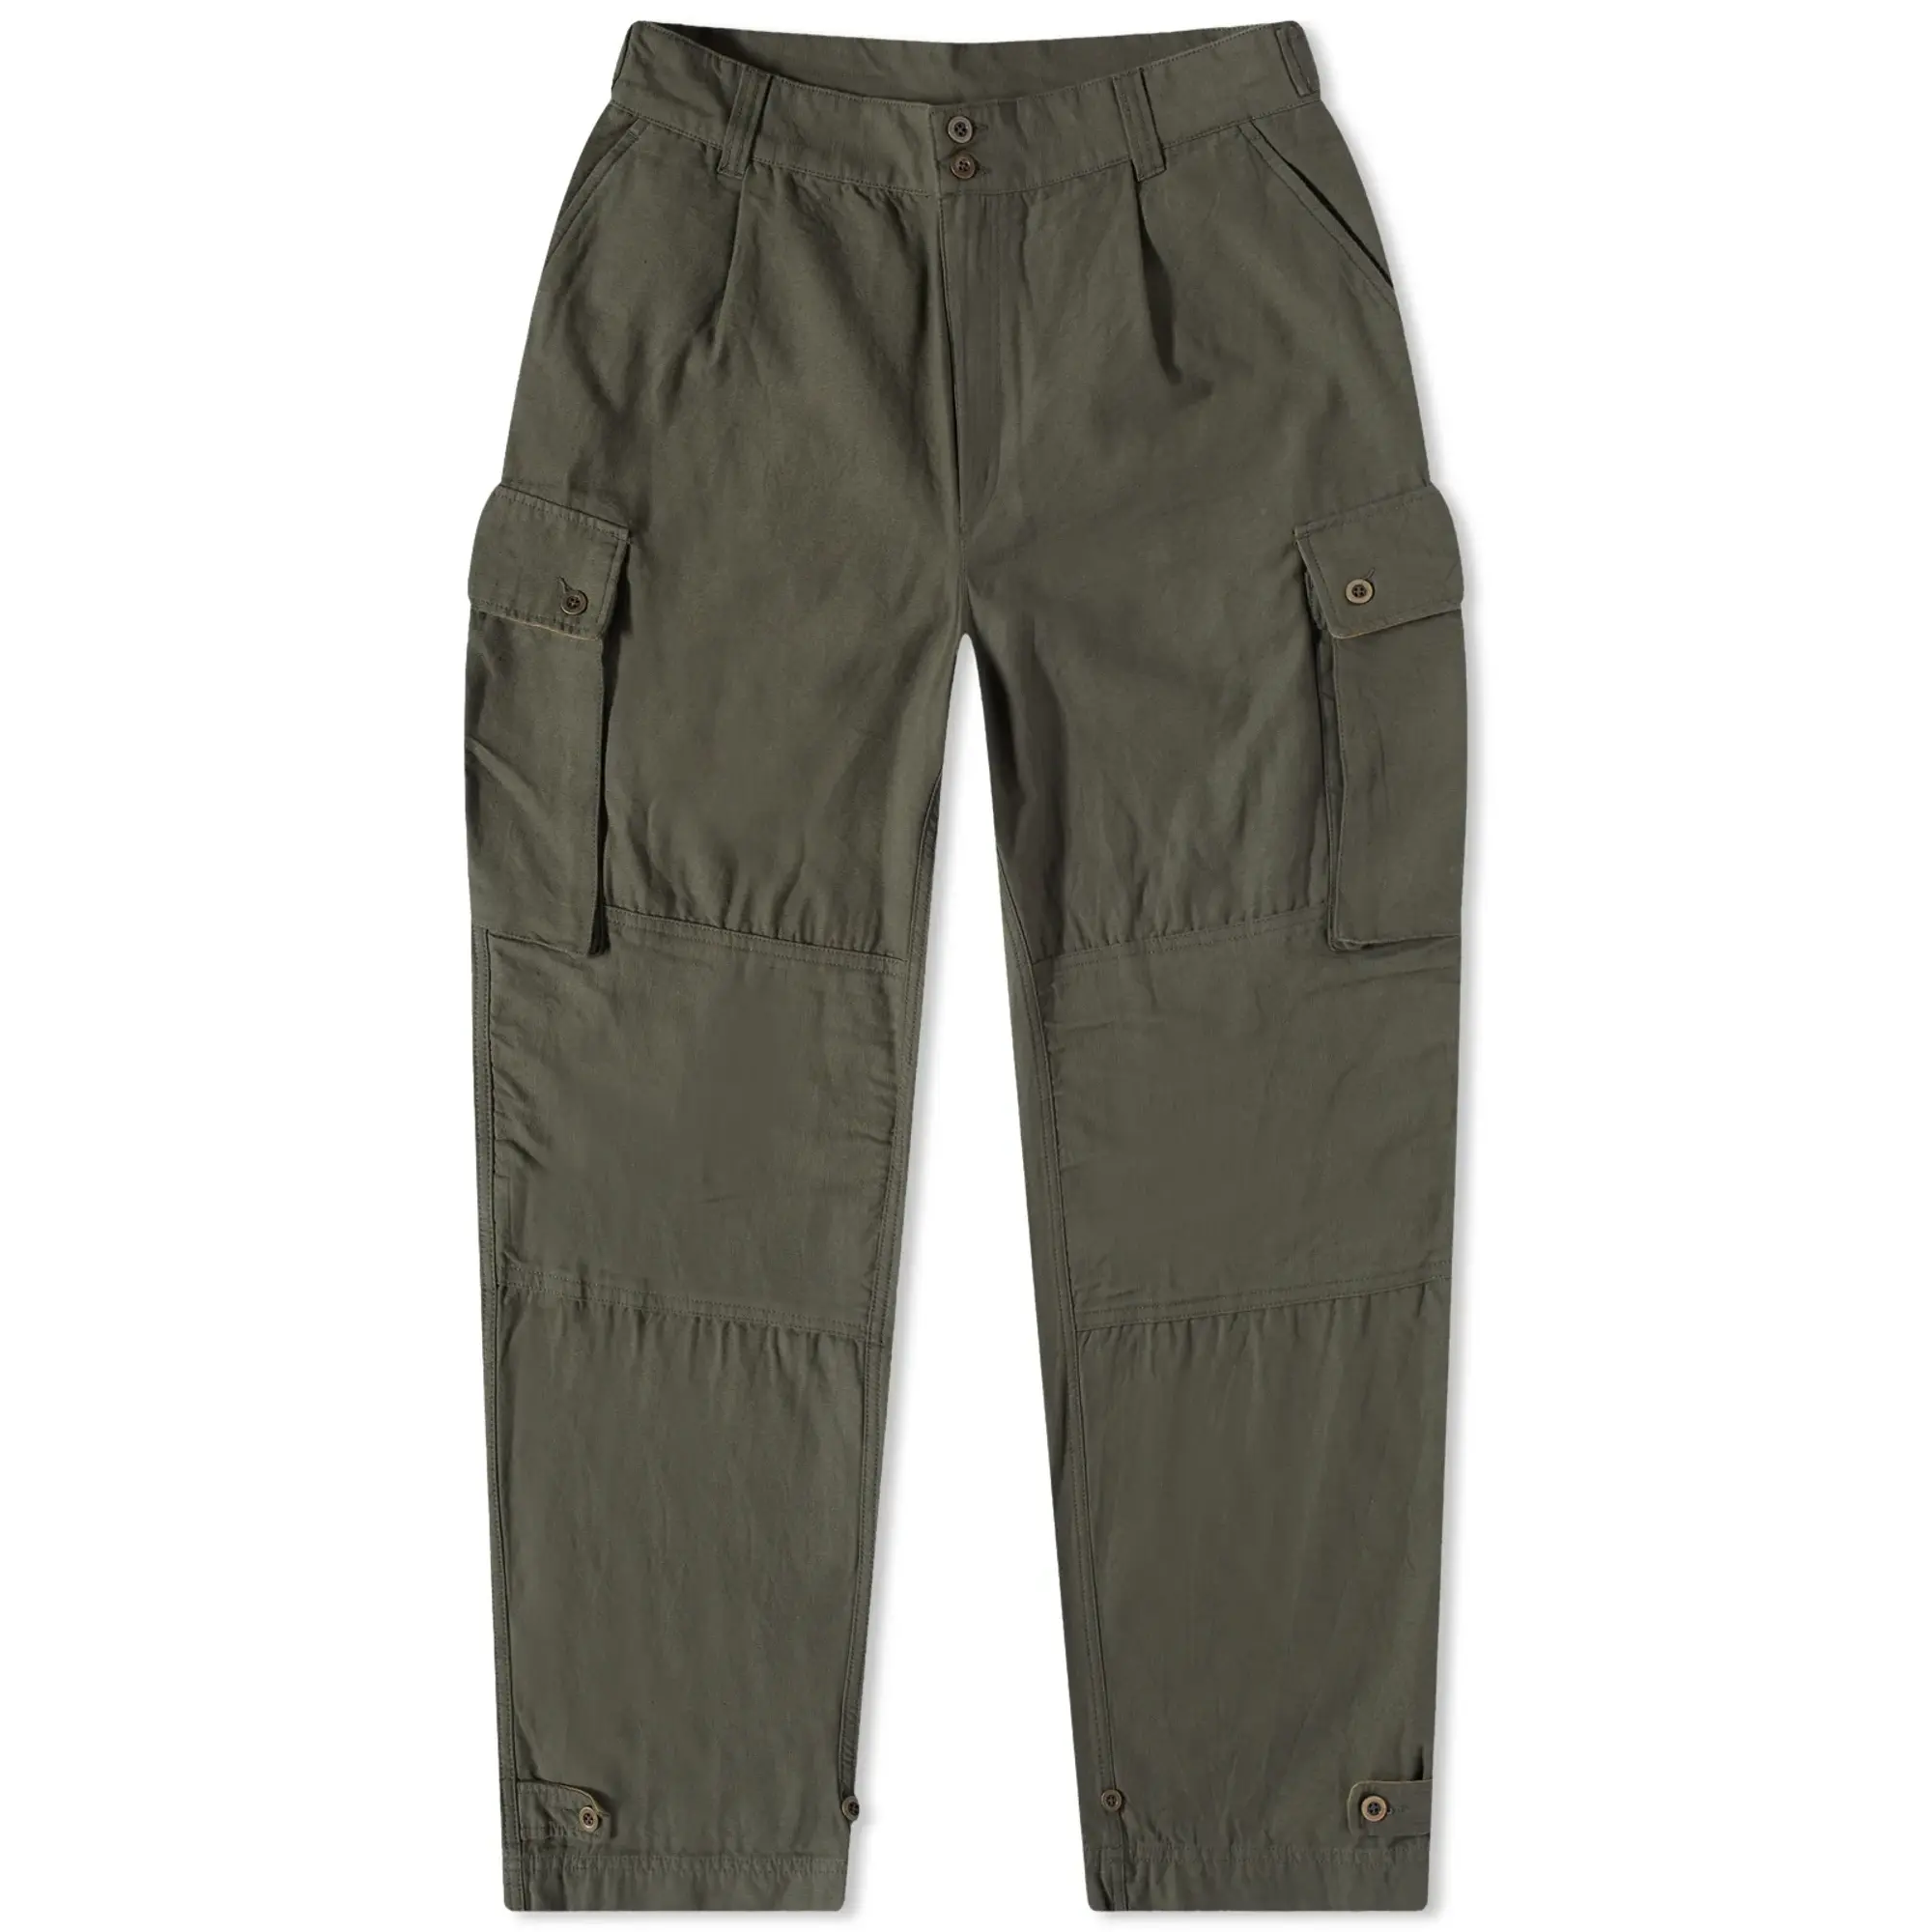 FrizmWORKS Men's M64 French Army Pants Charcoal